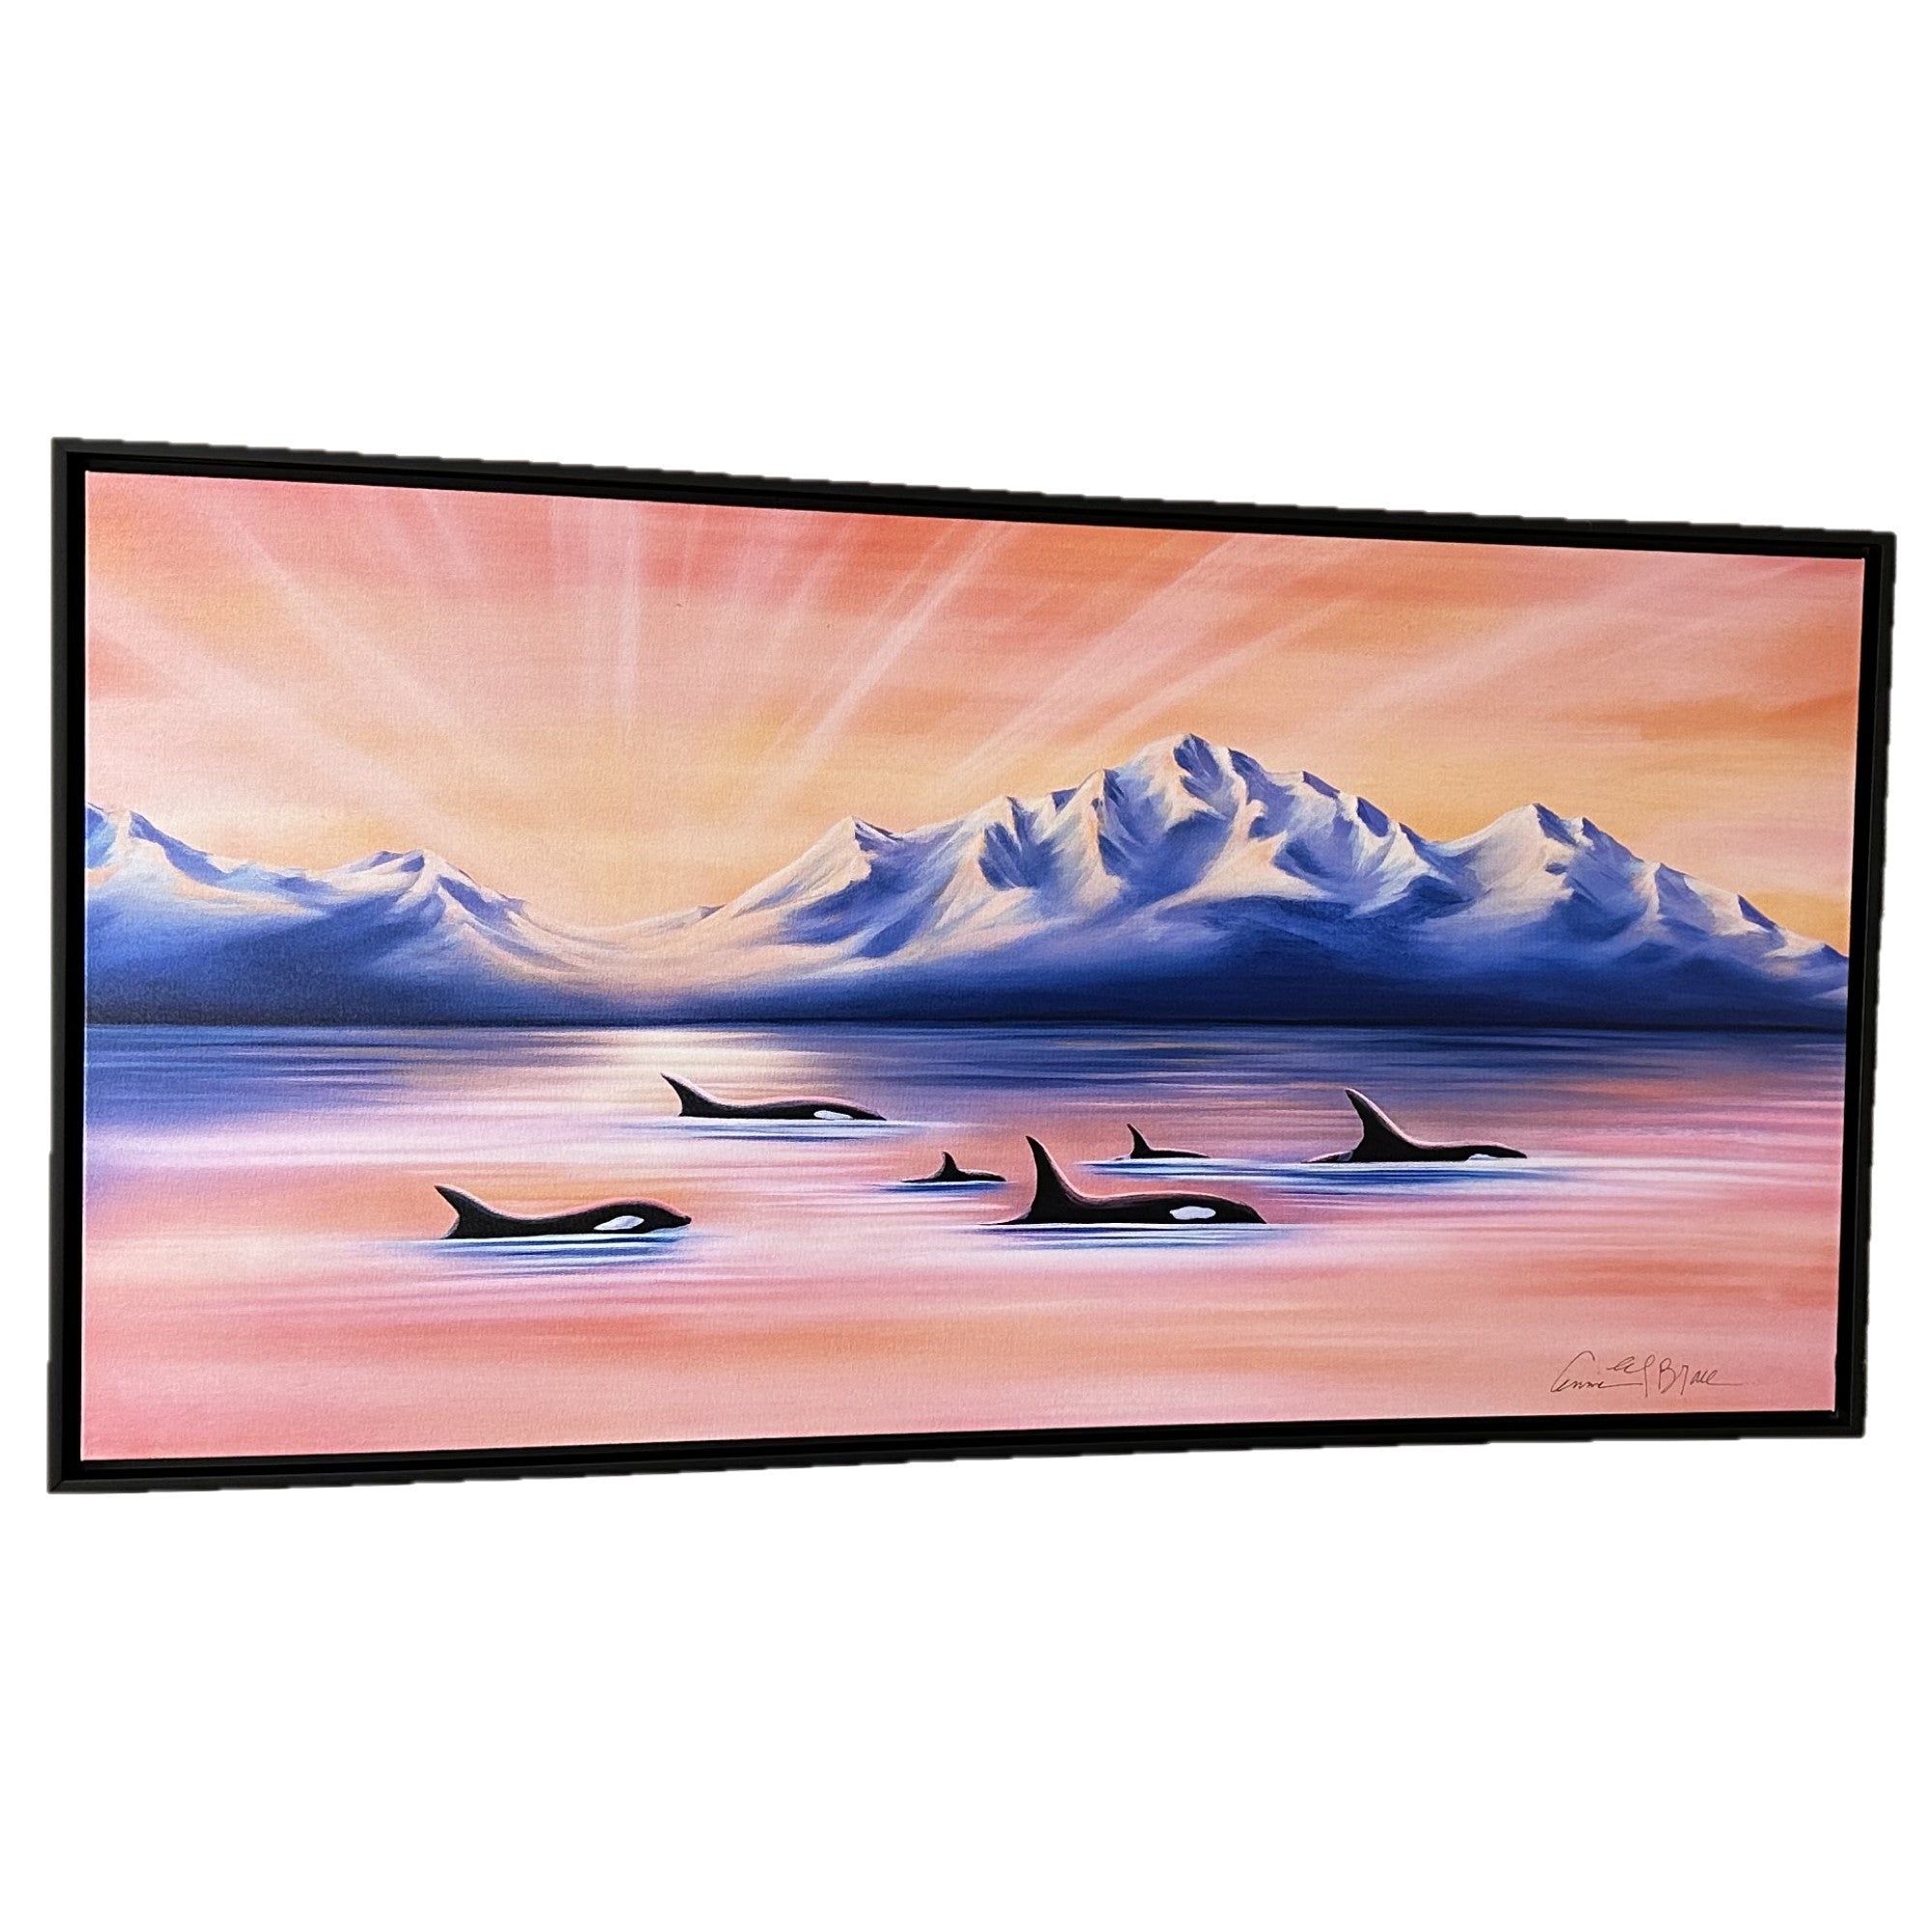 Orca Echo Lines Framed Canvas Print